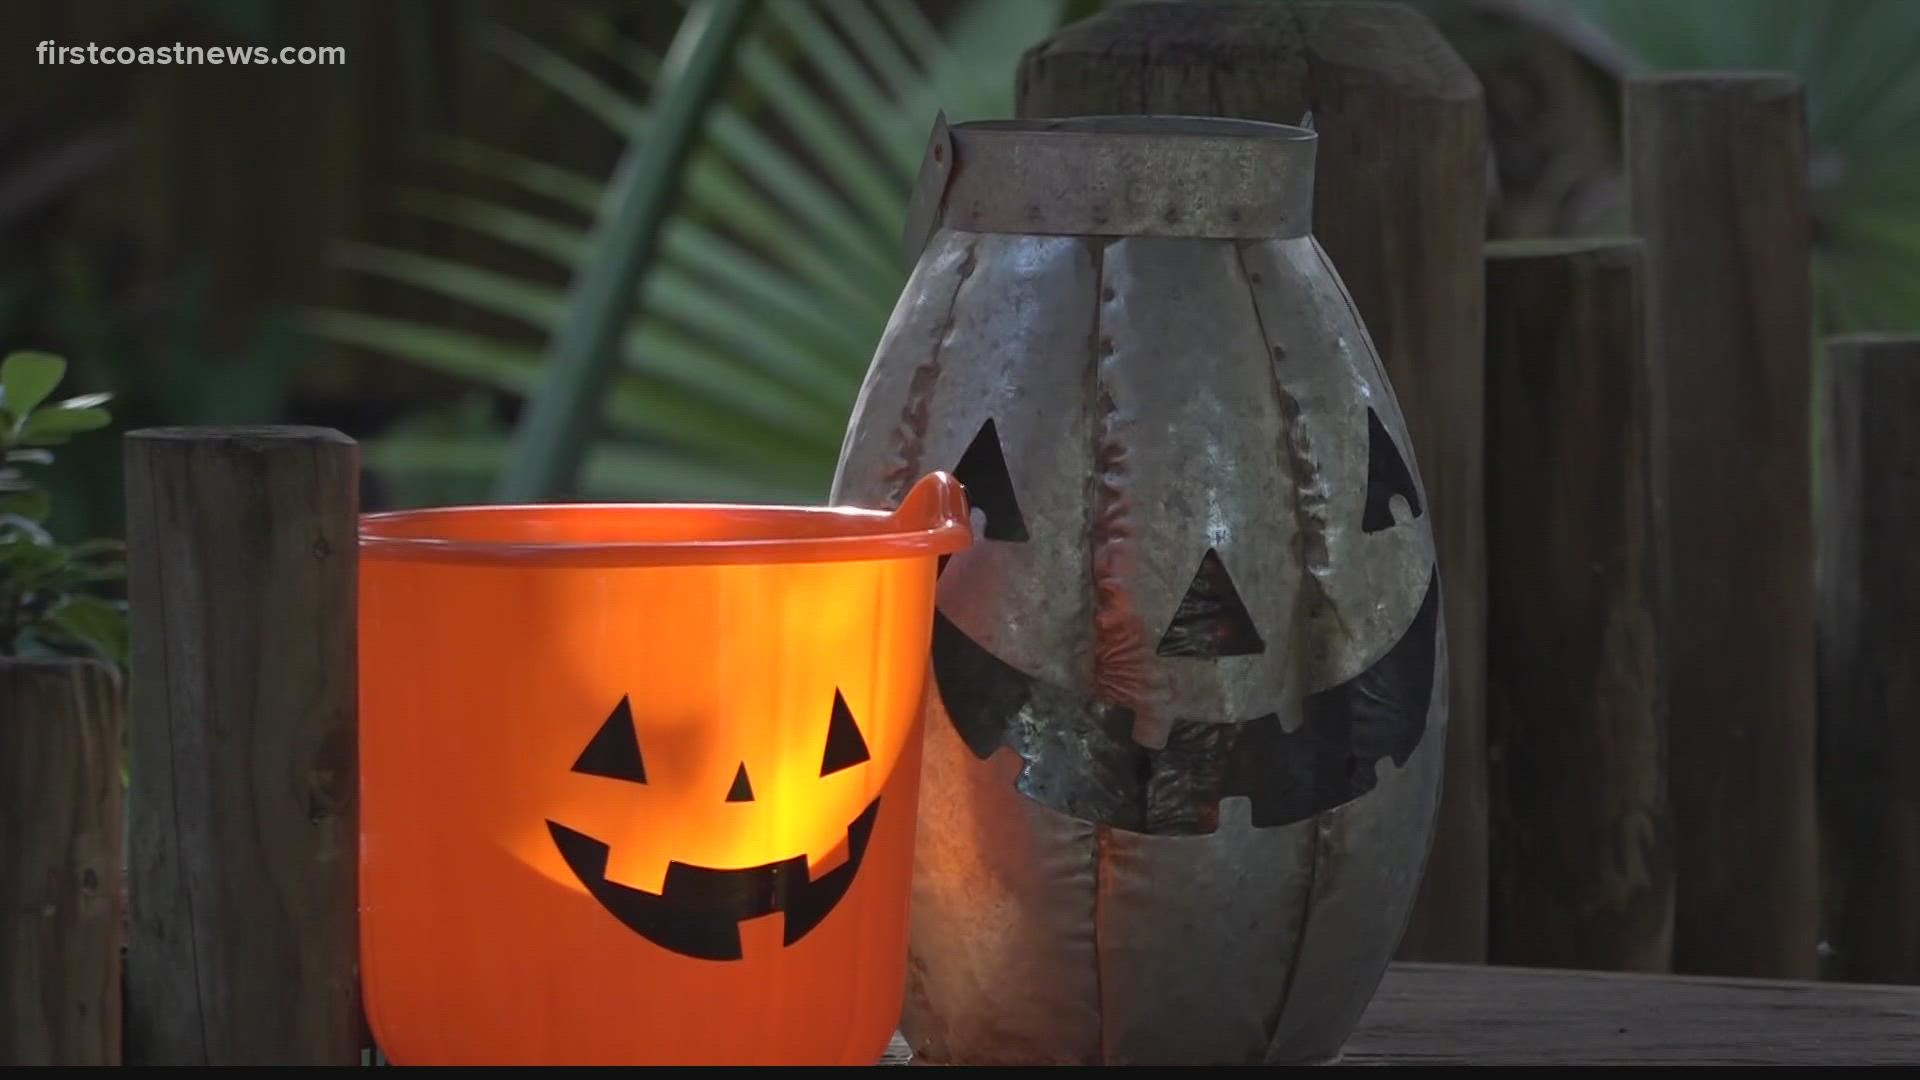 This weekend the St. Augustine Alligator Farm is hosting a special Halloween event.